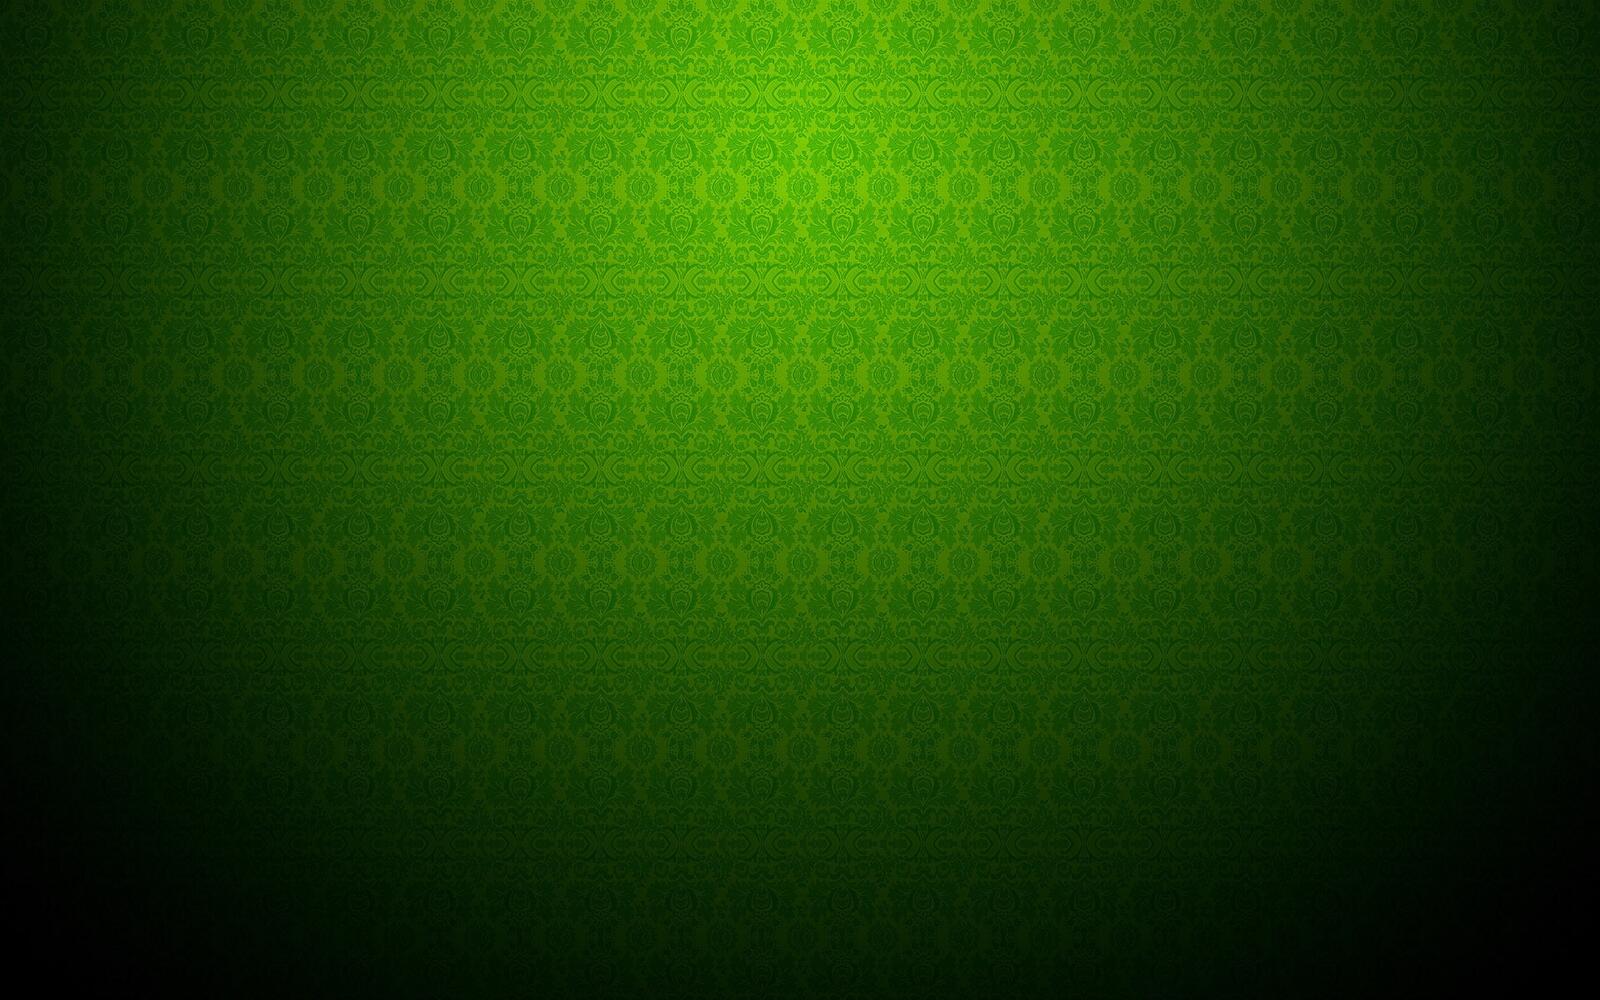 Wallpapers green background patterns surface on the desktop